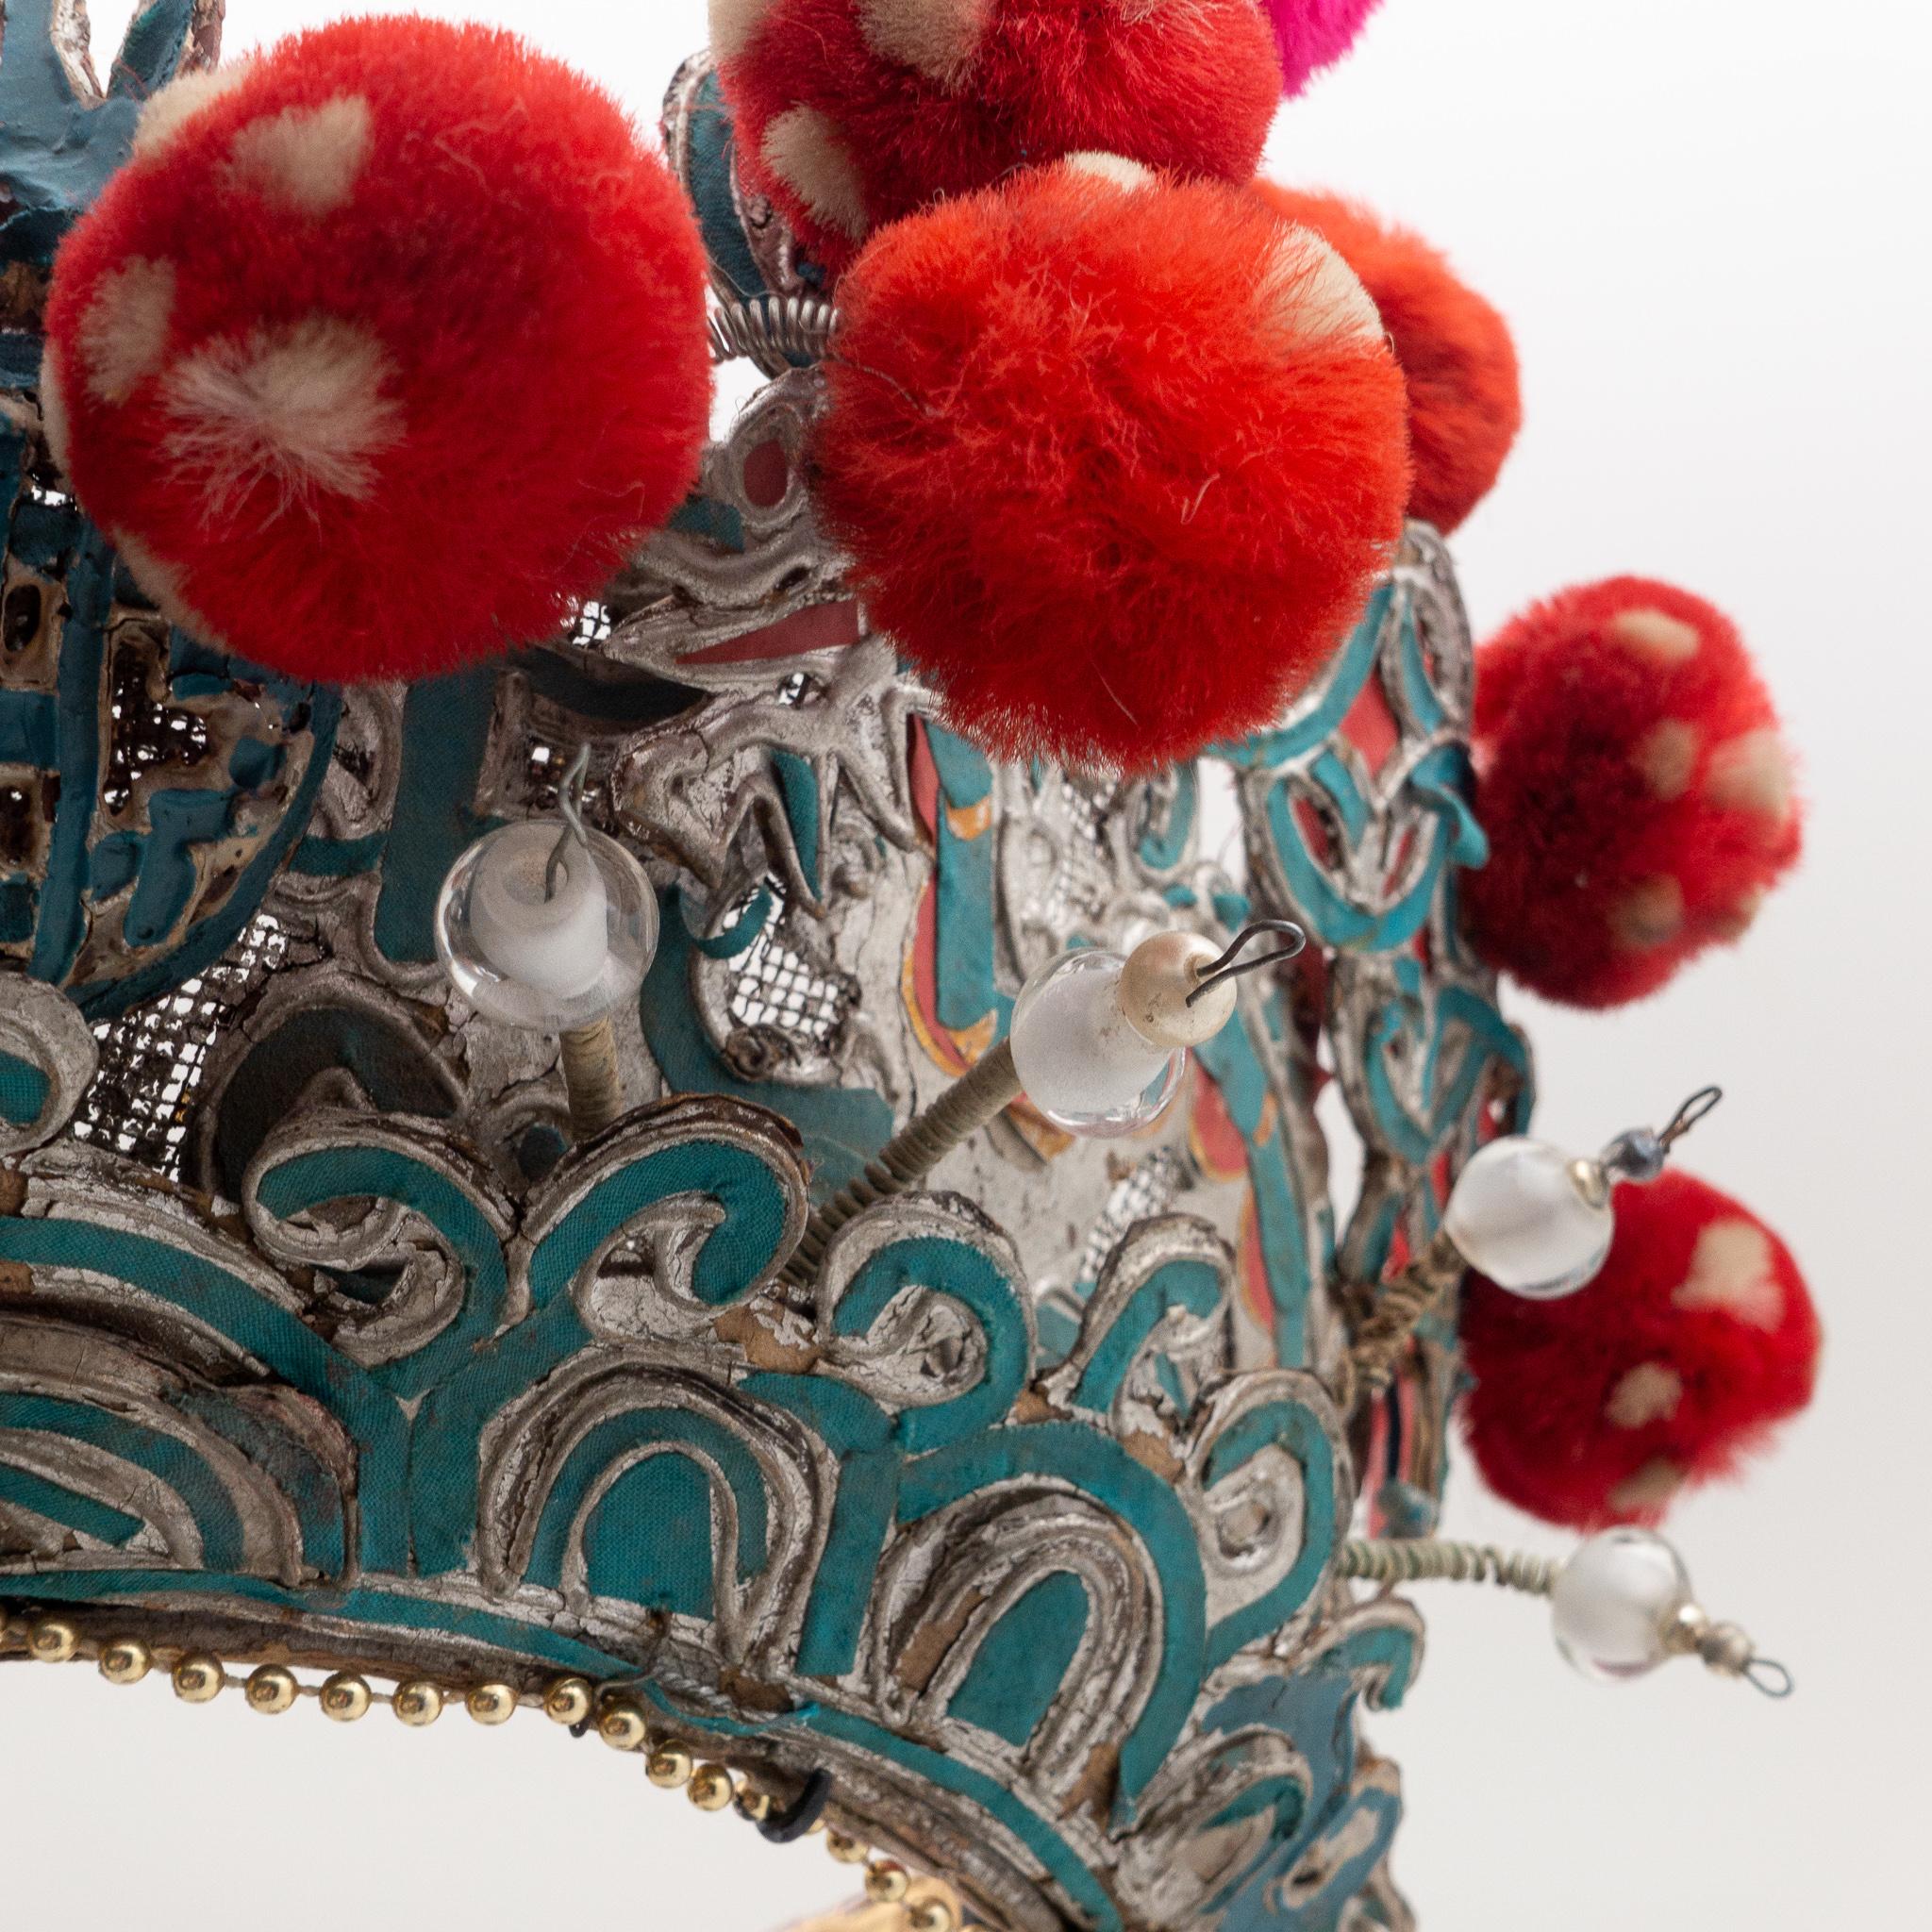 Antique Chinese Theatre Opera Headdress, Turquoise/Silver, Red/Fuchsia Pom-Poms 3